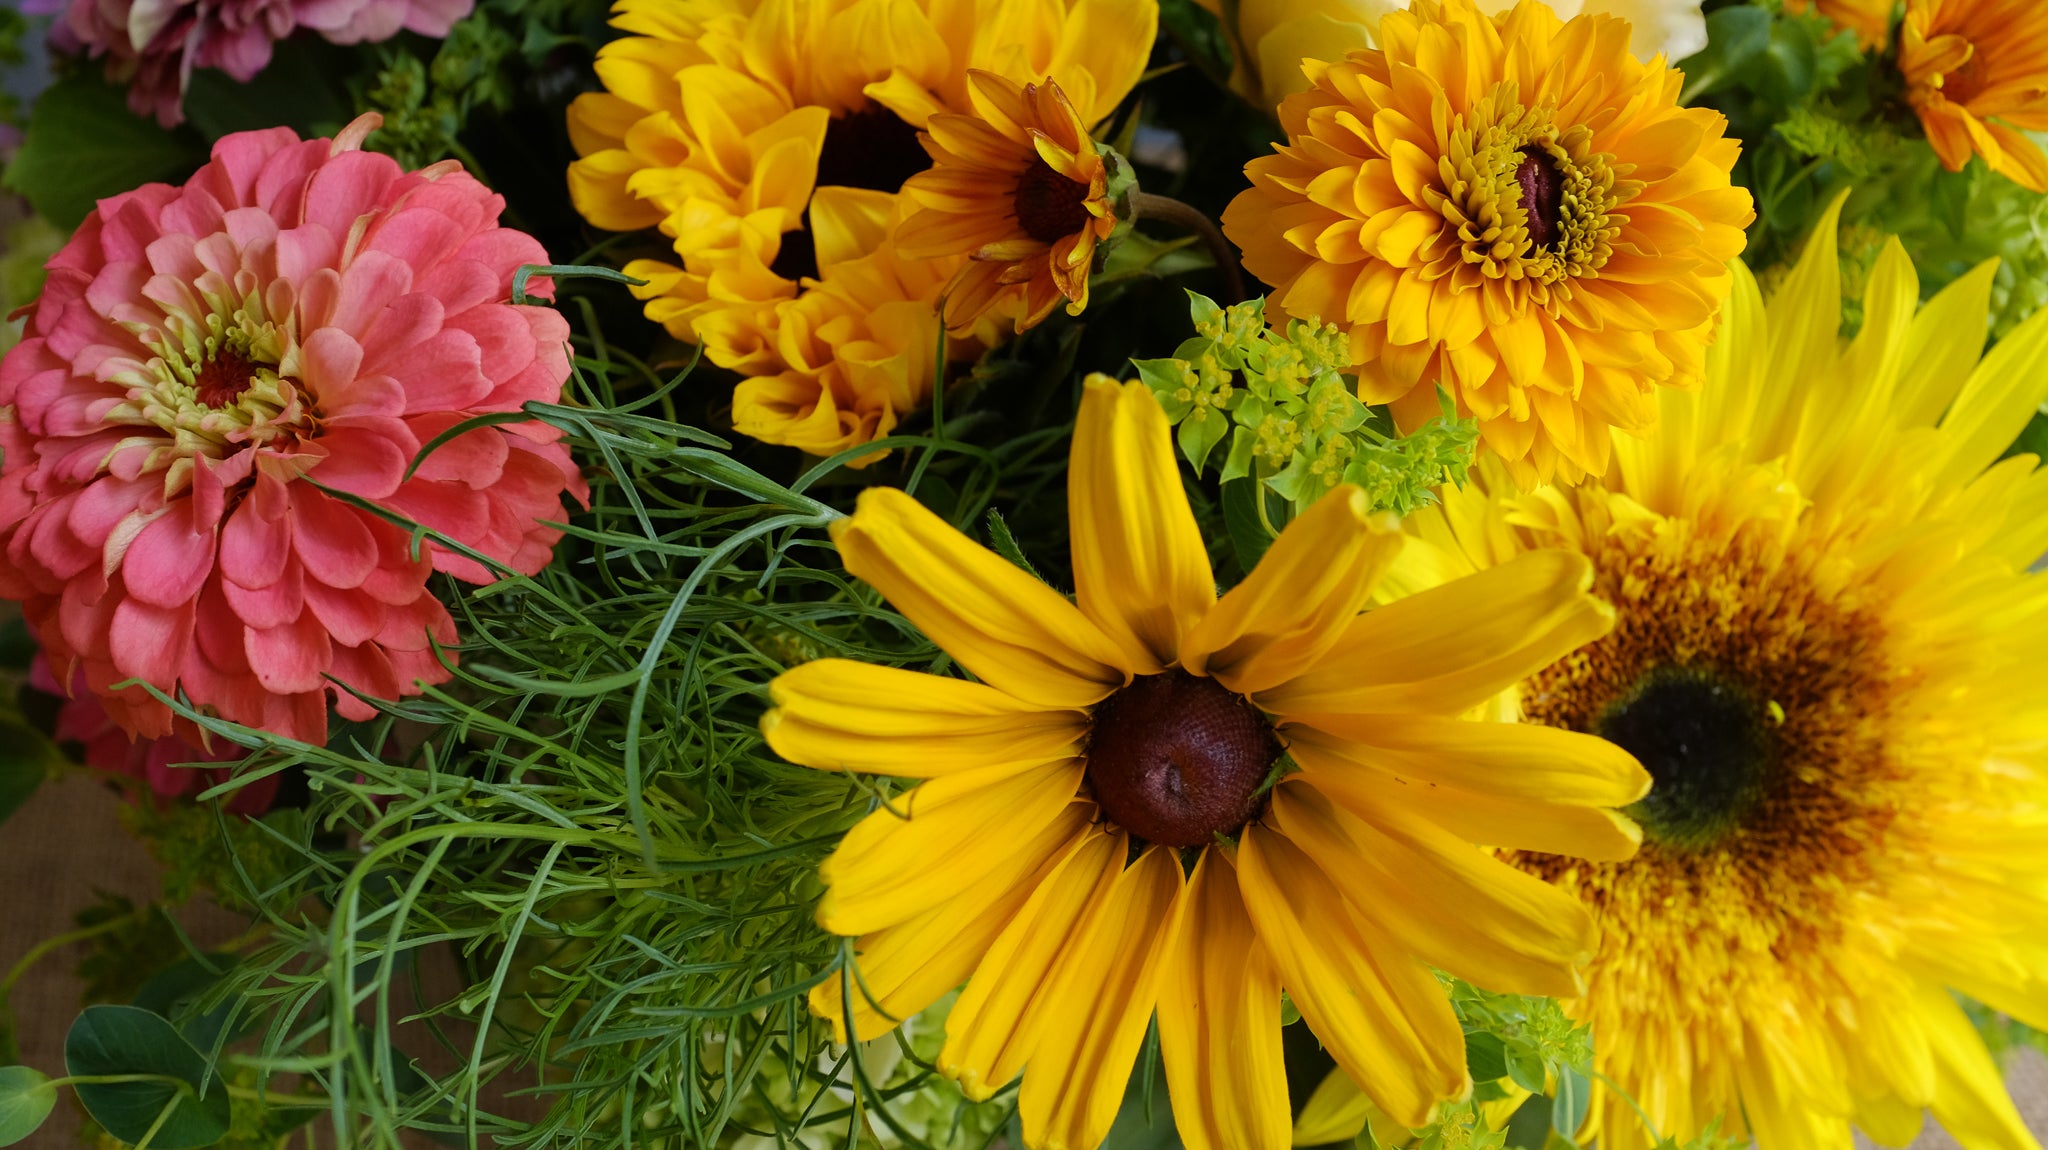 Local summer blooms at Michler's